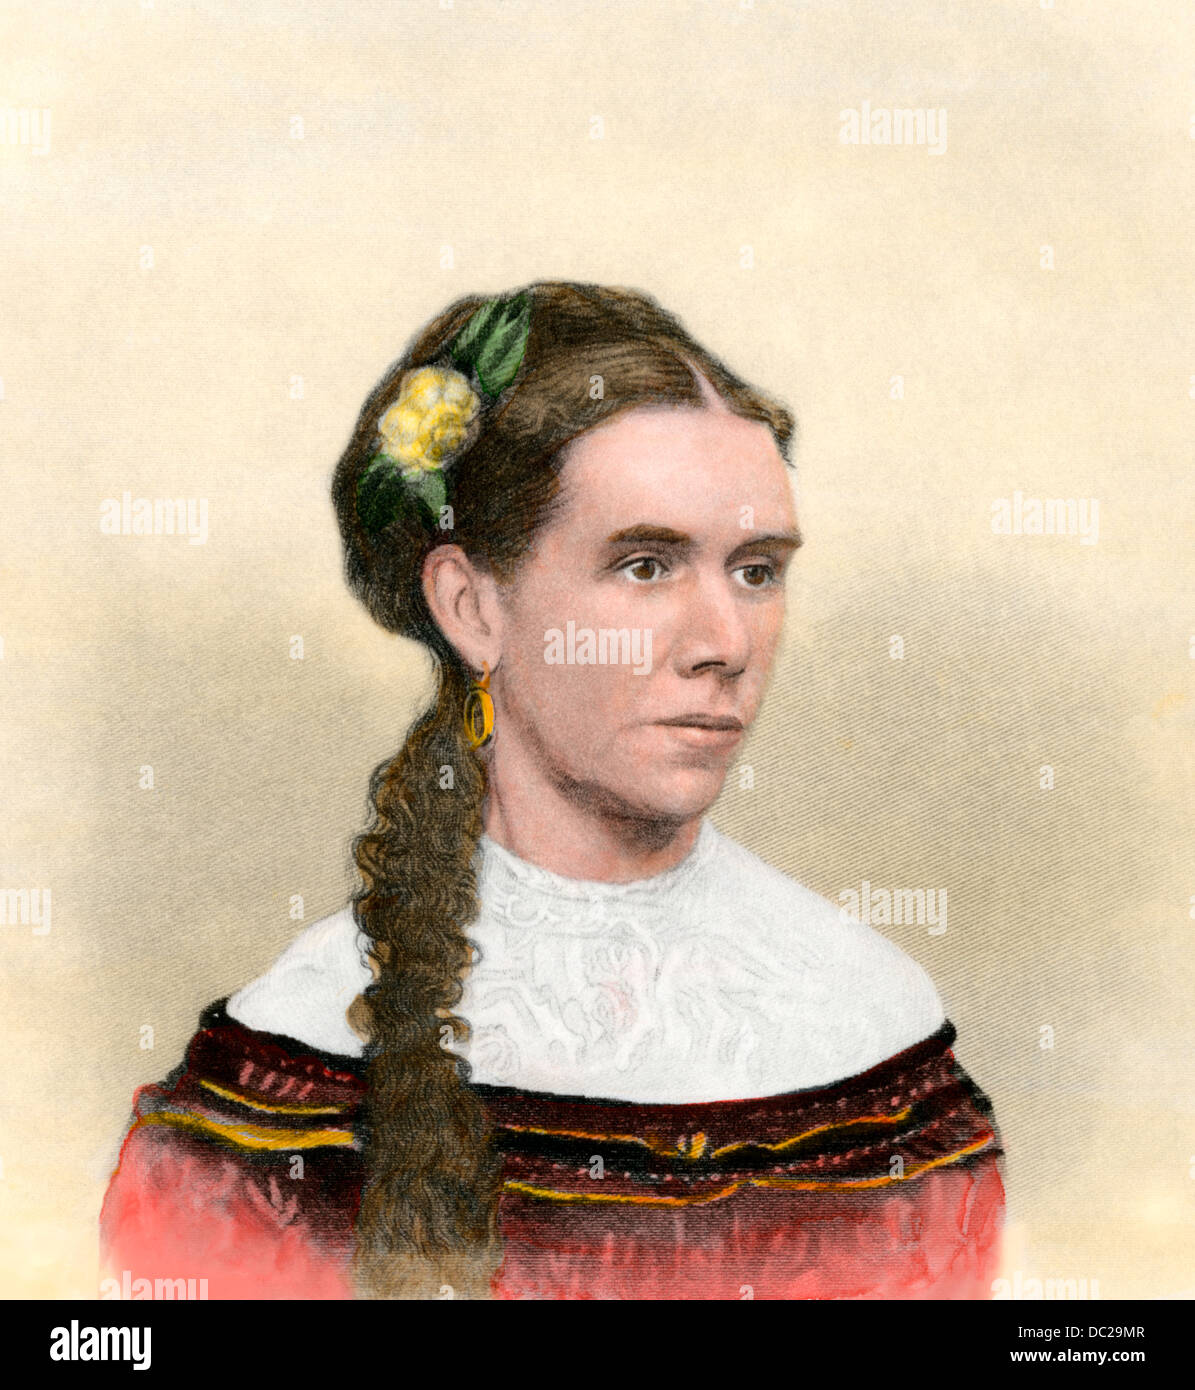 Martha Johnson Patterson, daughter of President Andrew Johnson, who served as White House hostess. Hand-colored engraving Stock Photo